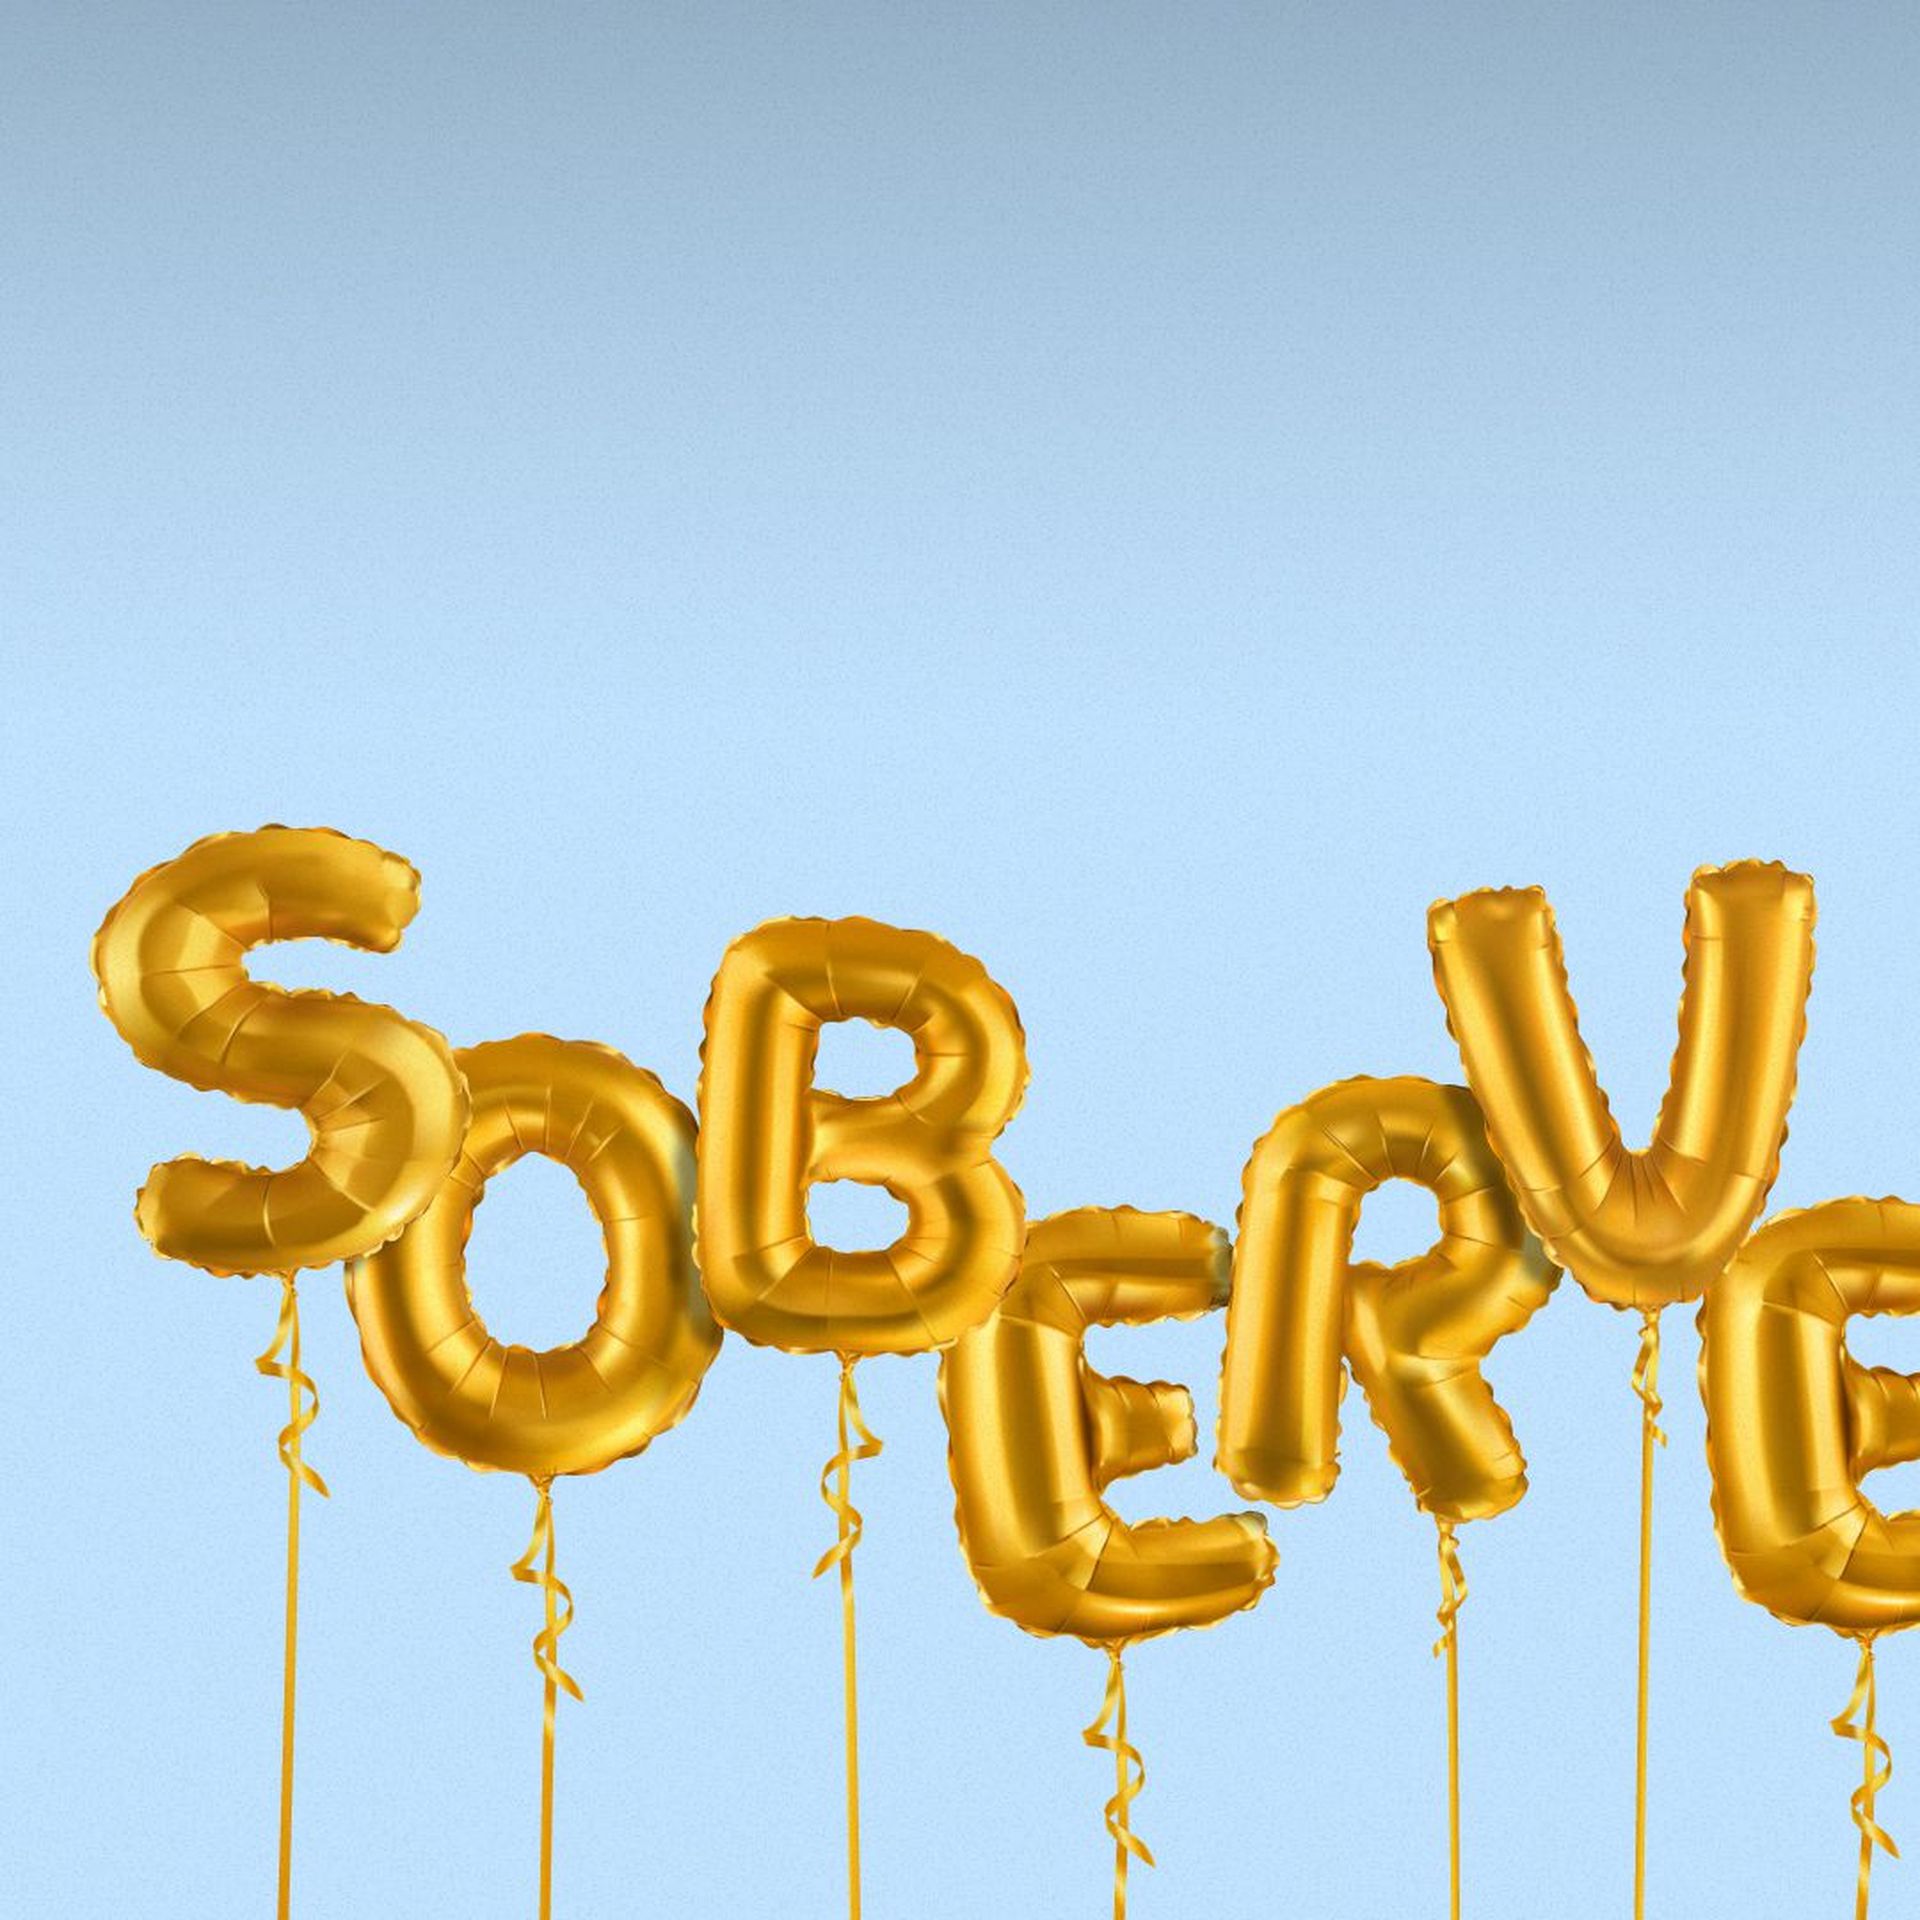 Illustration of letter balloons spelling out "SOBERVERSARY."